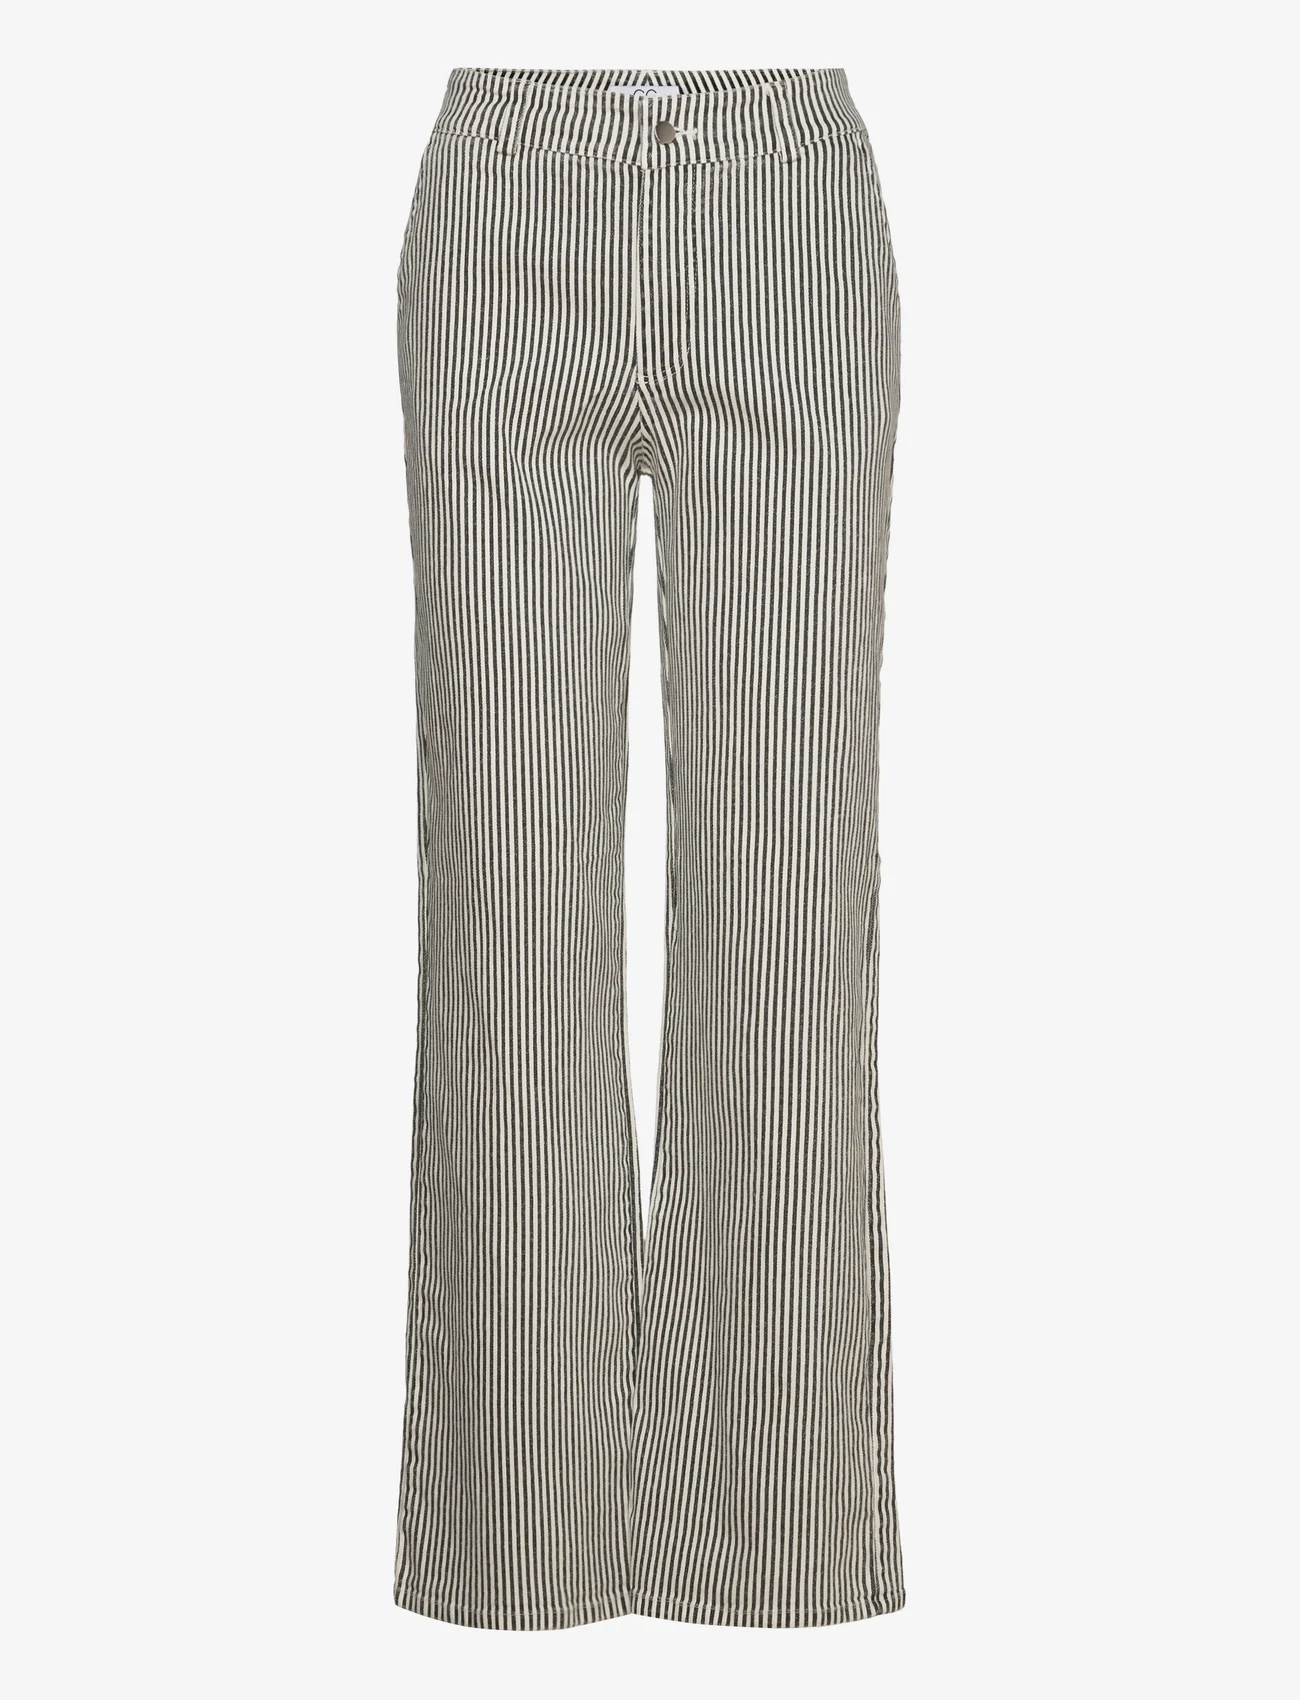 Coster Copenhagen - CC Heart MATHILDE striped pants - party wear at outlet prices - off white/black stripe - 0